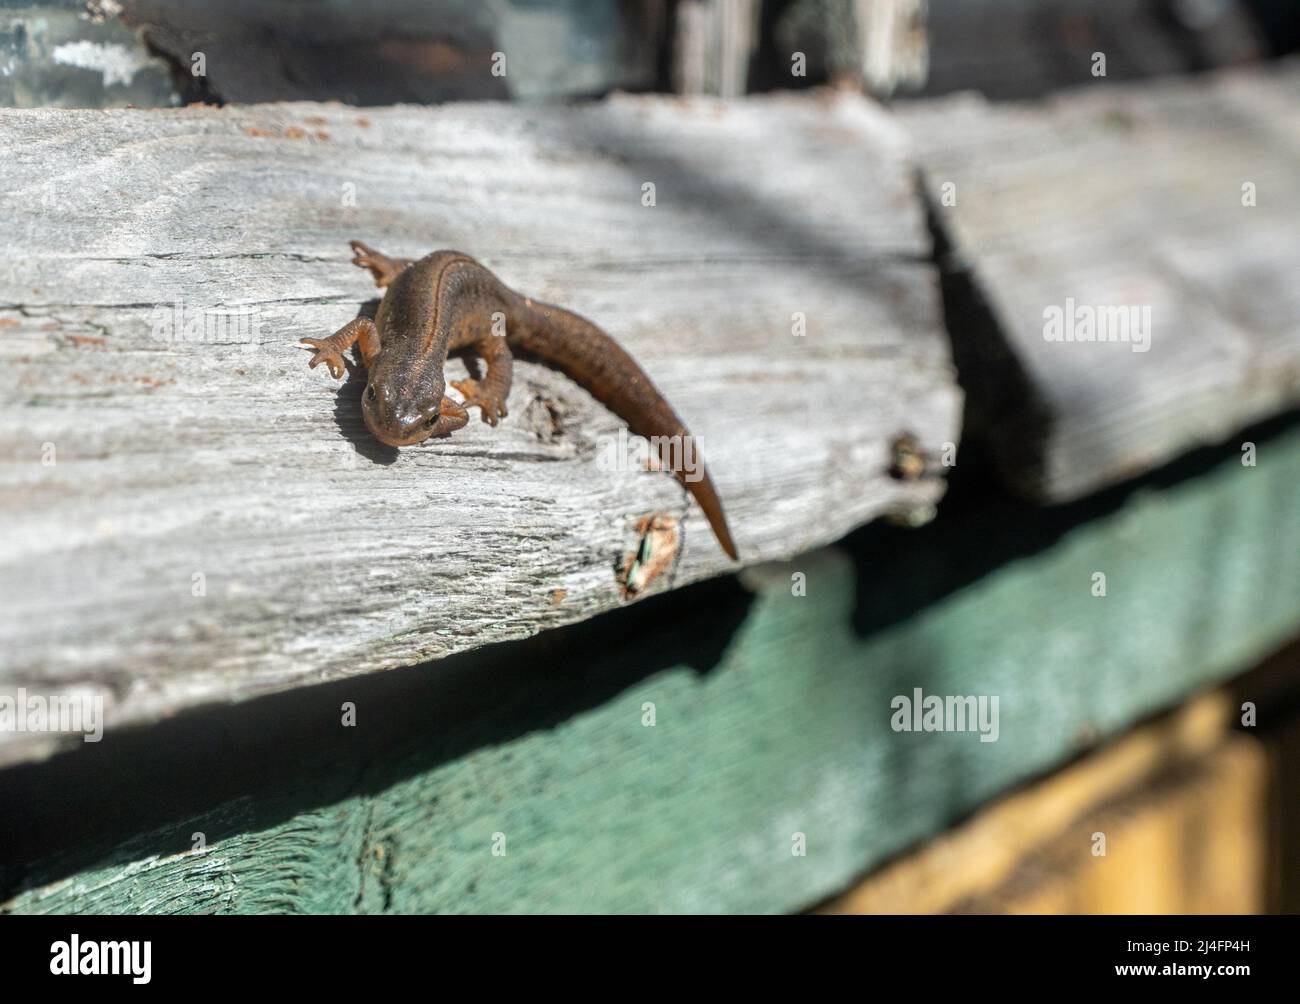 A beautiful brown lizard basks in the sun. Lies on a gray stone Stock Photo